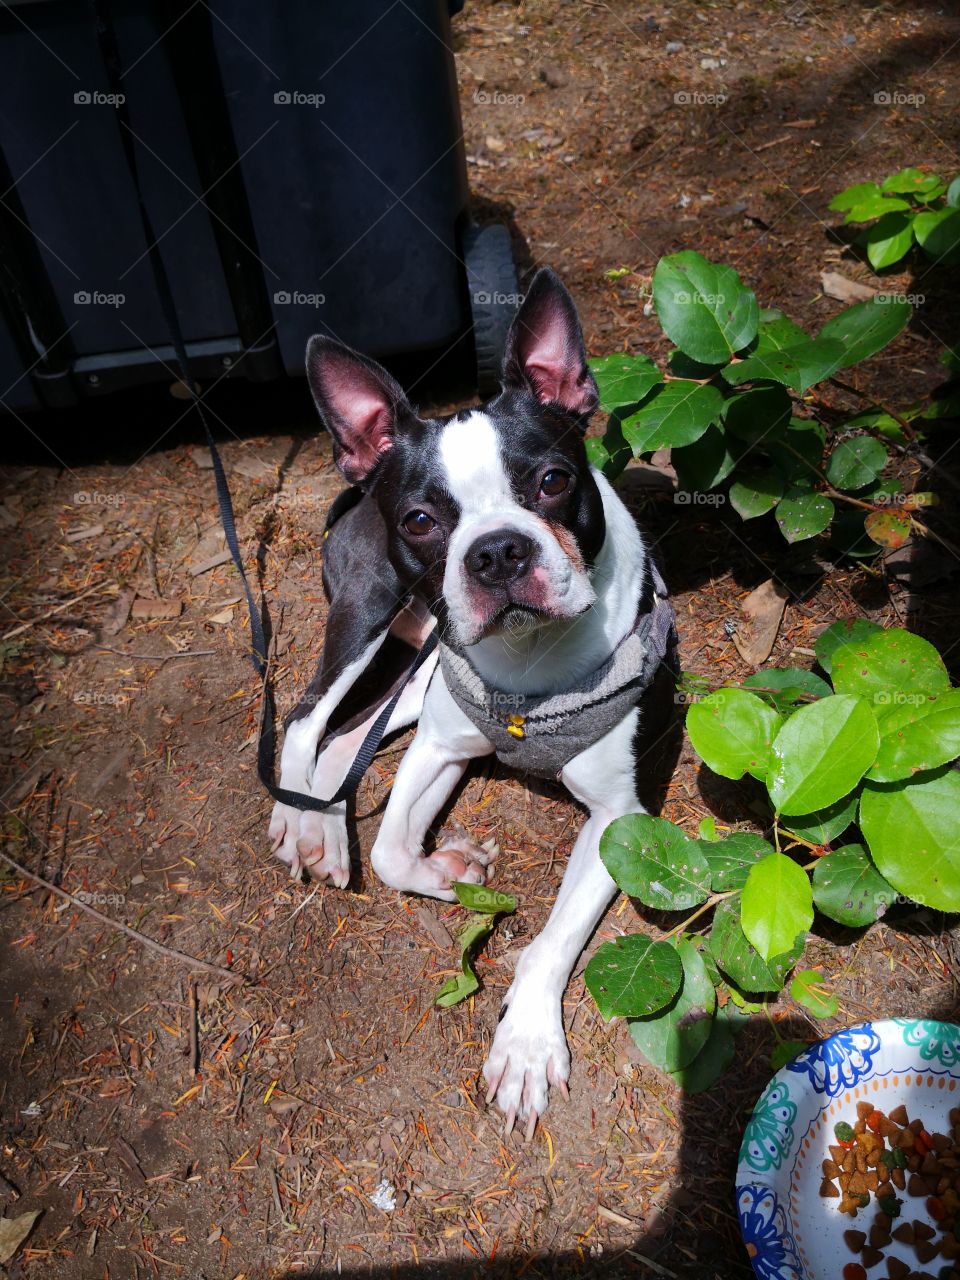 bozo the Boston Terrier enjoying the sun while camping and exploring